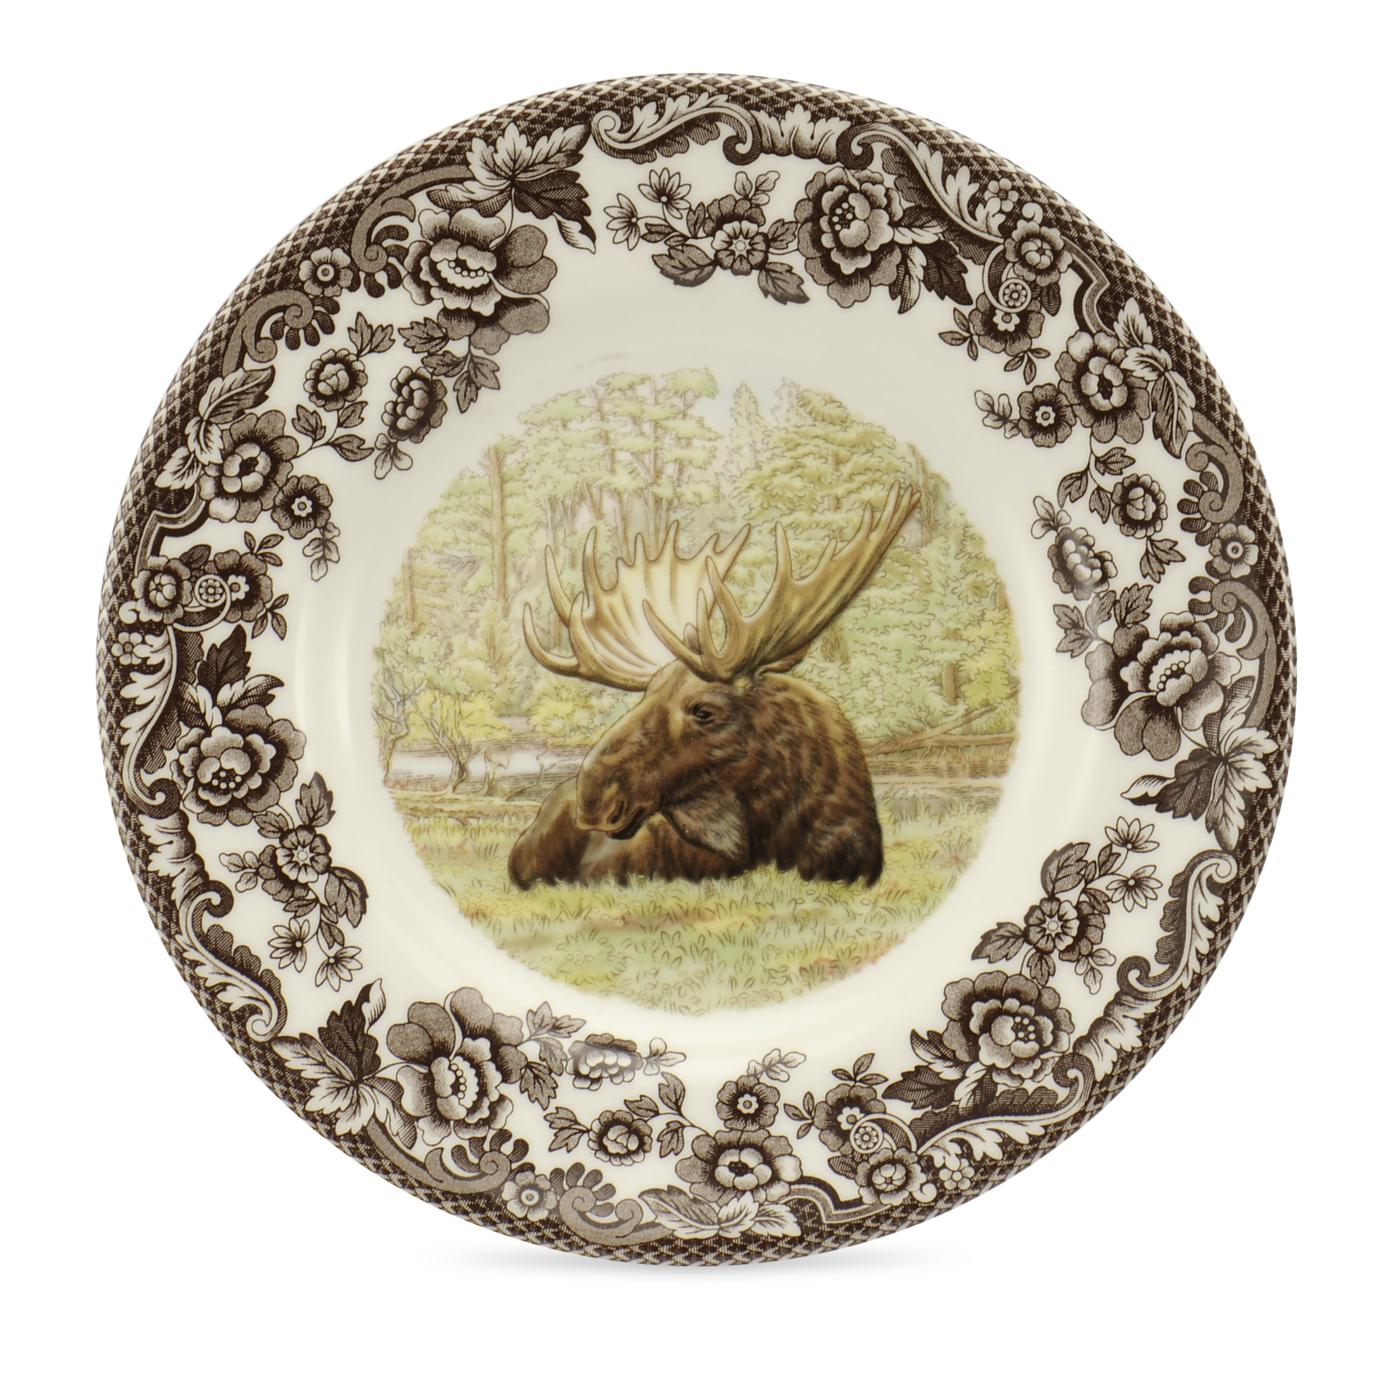 Woodland Bread and Butter Plate 6 Inch, Moose image number null